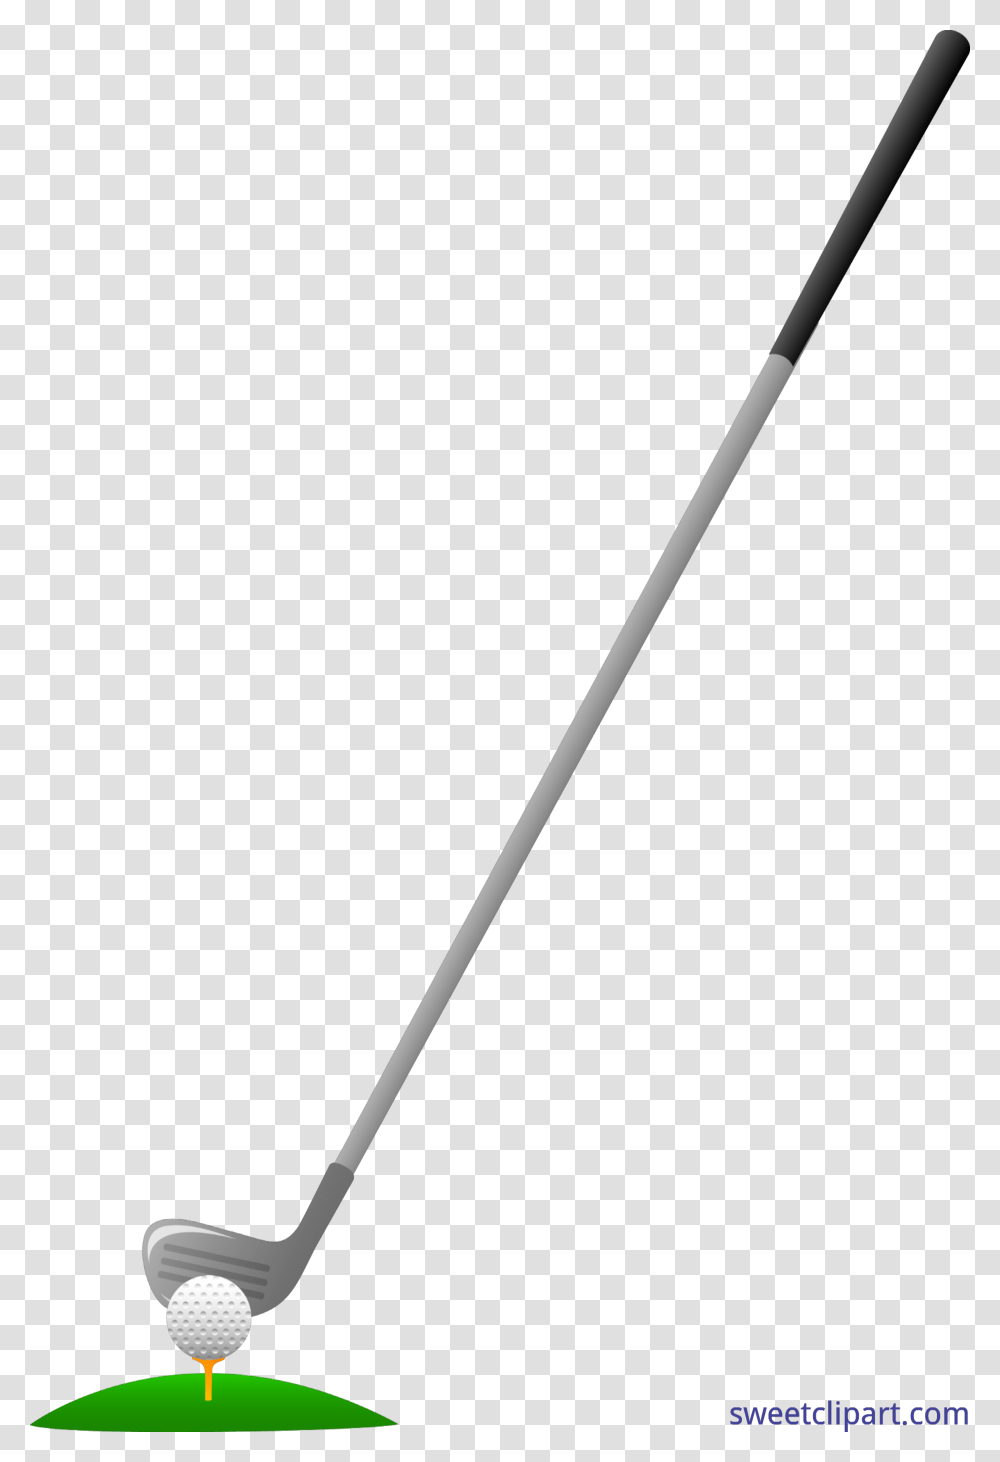 Clip Art Sweet Golf Bat And Ball, Weapon, Weaponry, Spear Transparent Png